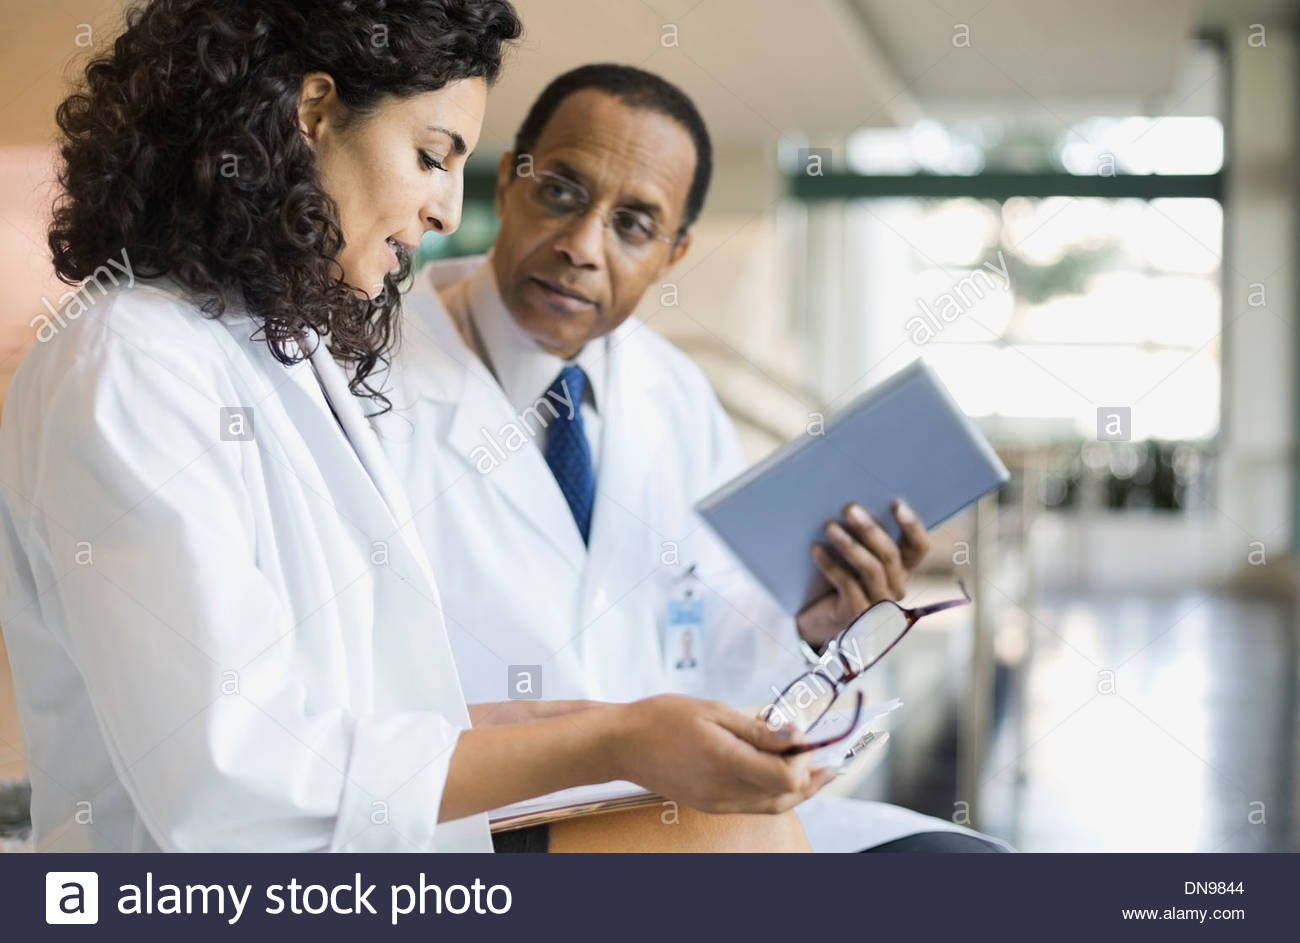 Doctors discussing medical results Stock Photo